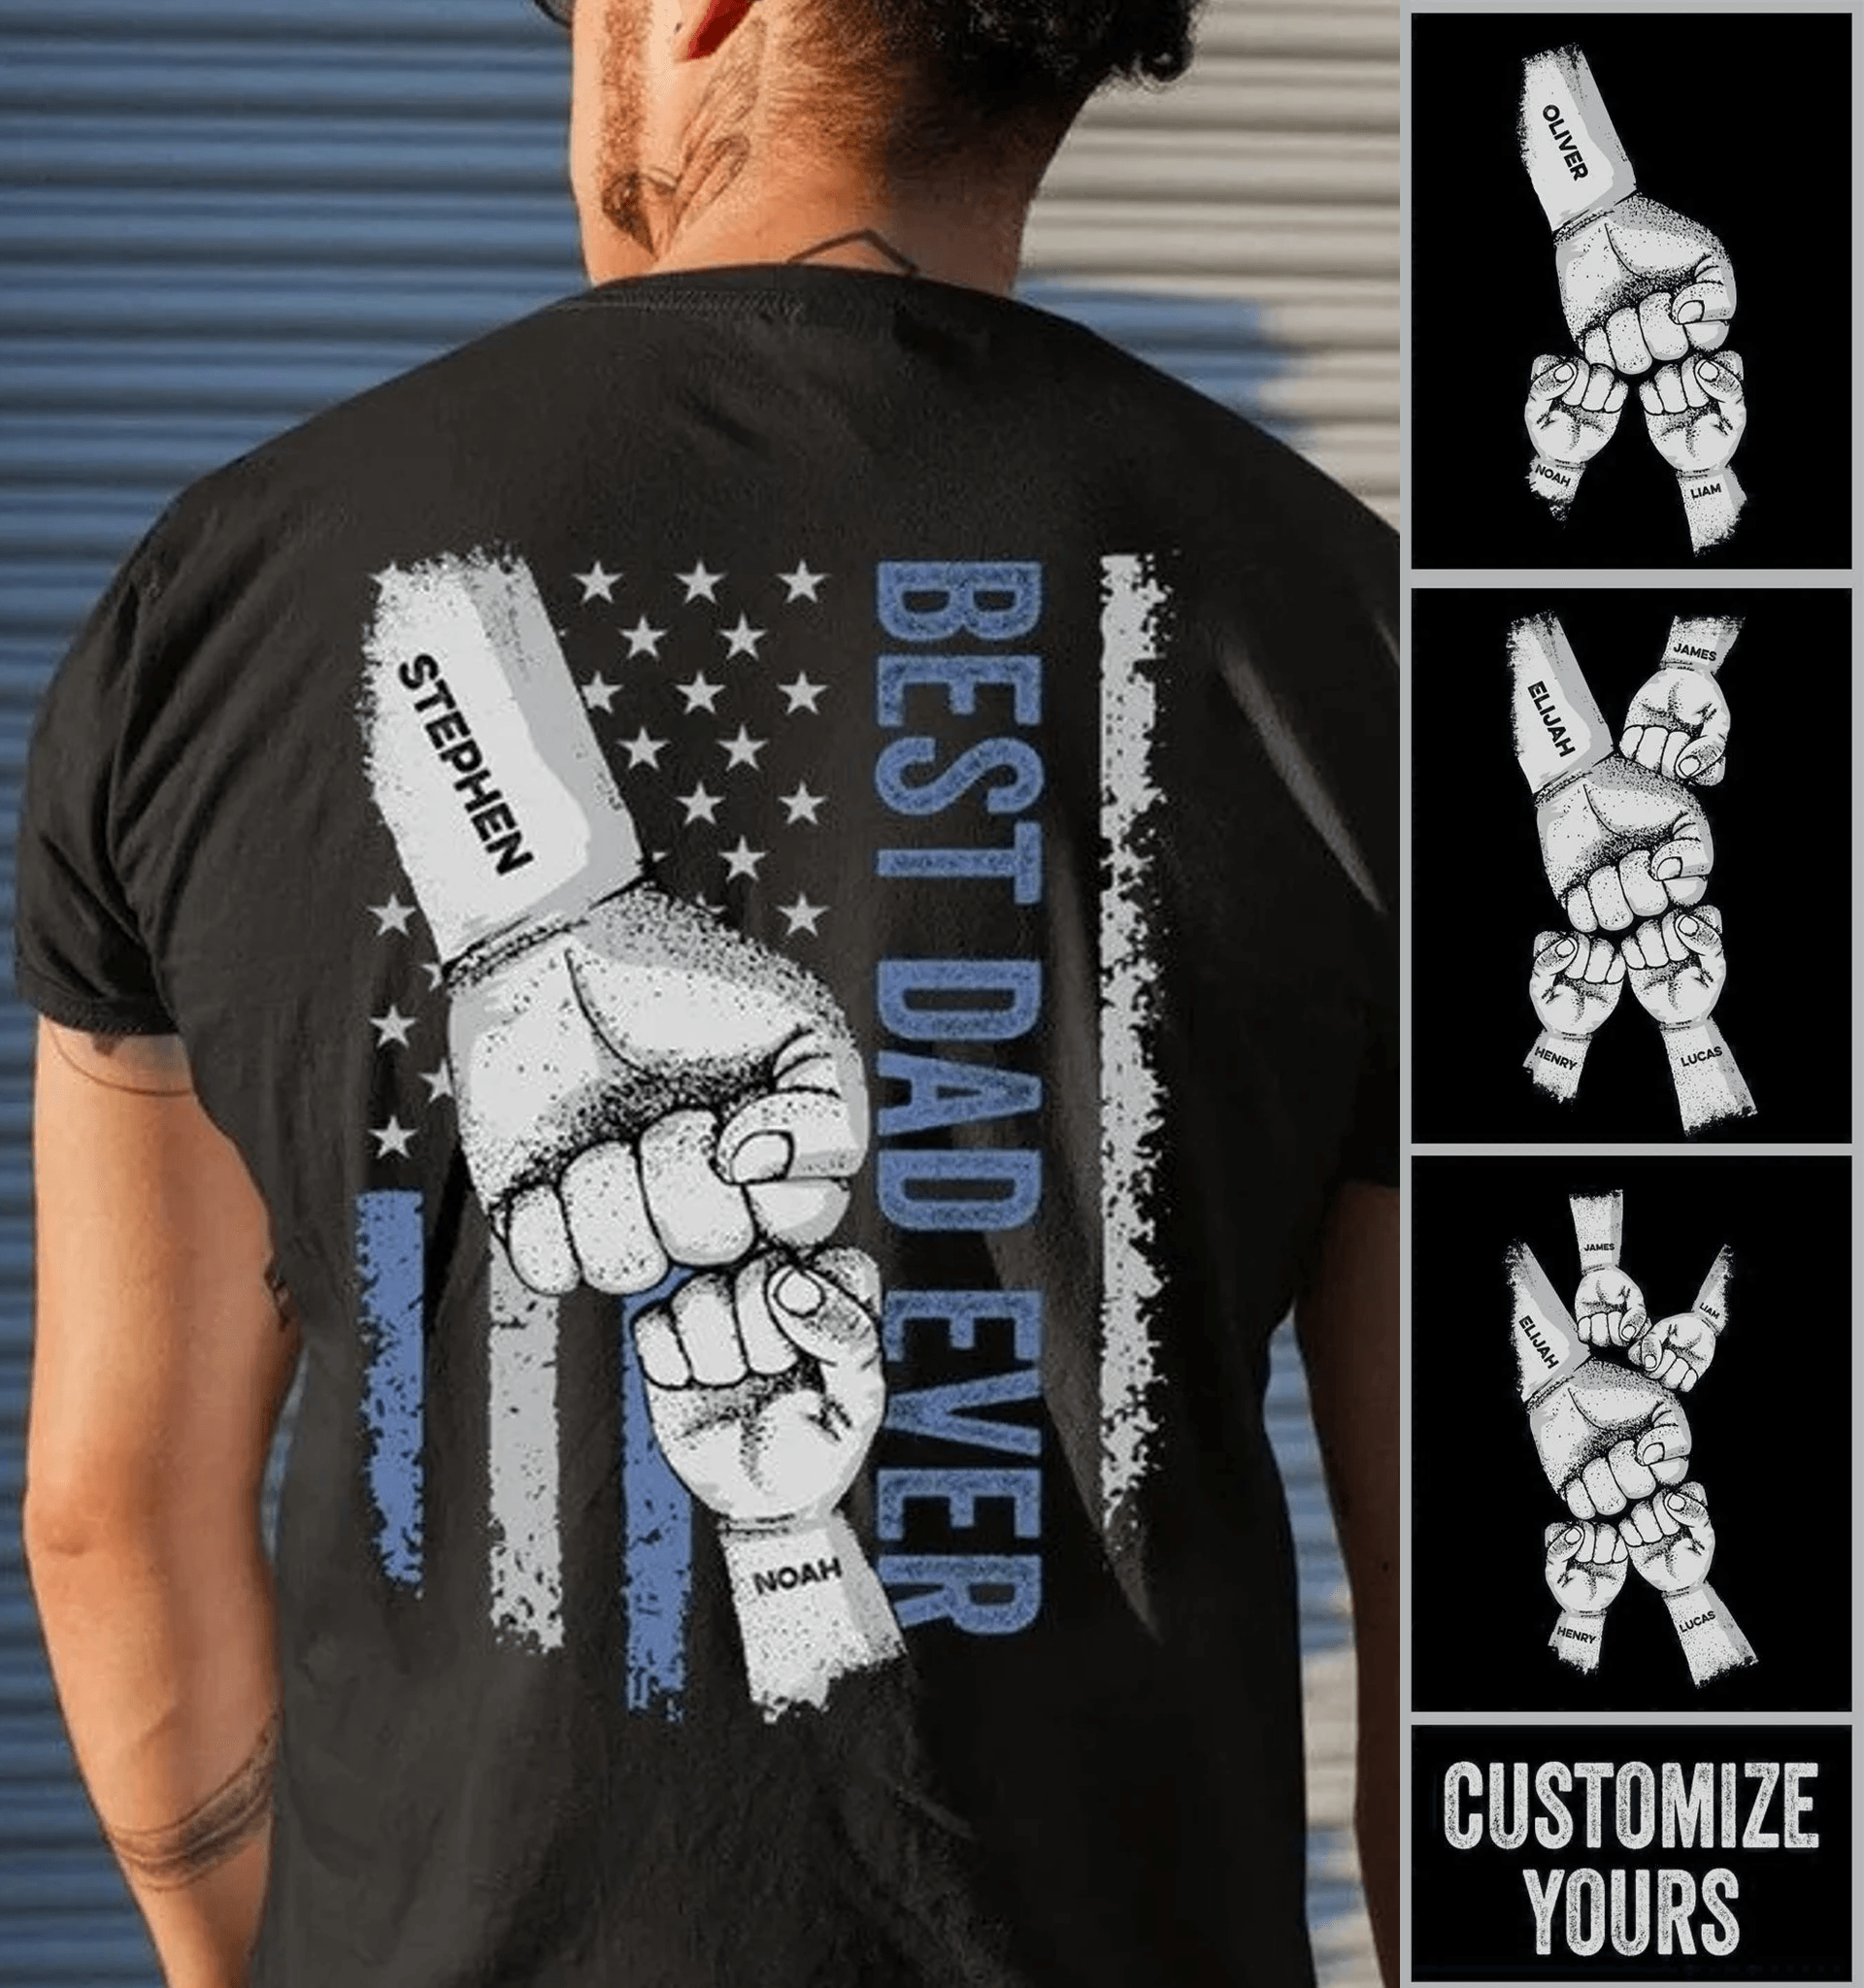 Best Dad Ever Raised Fist Bump - Personalized Custom Back Printed T Shirt - Father's Day Gift for Dad, Grandpa, Daddy, Dada, Dad Jokes - Suzitee Store